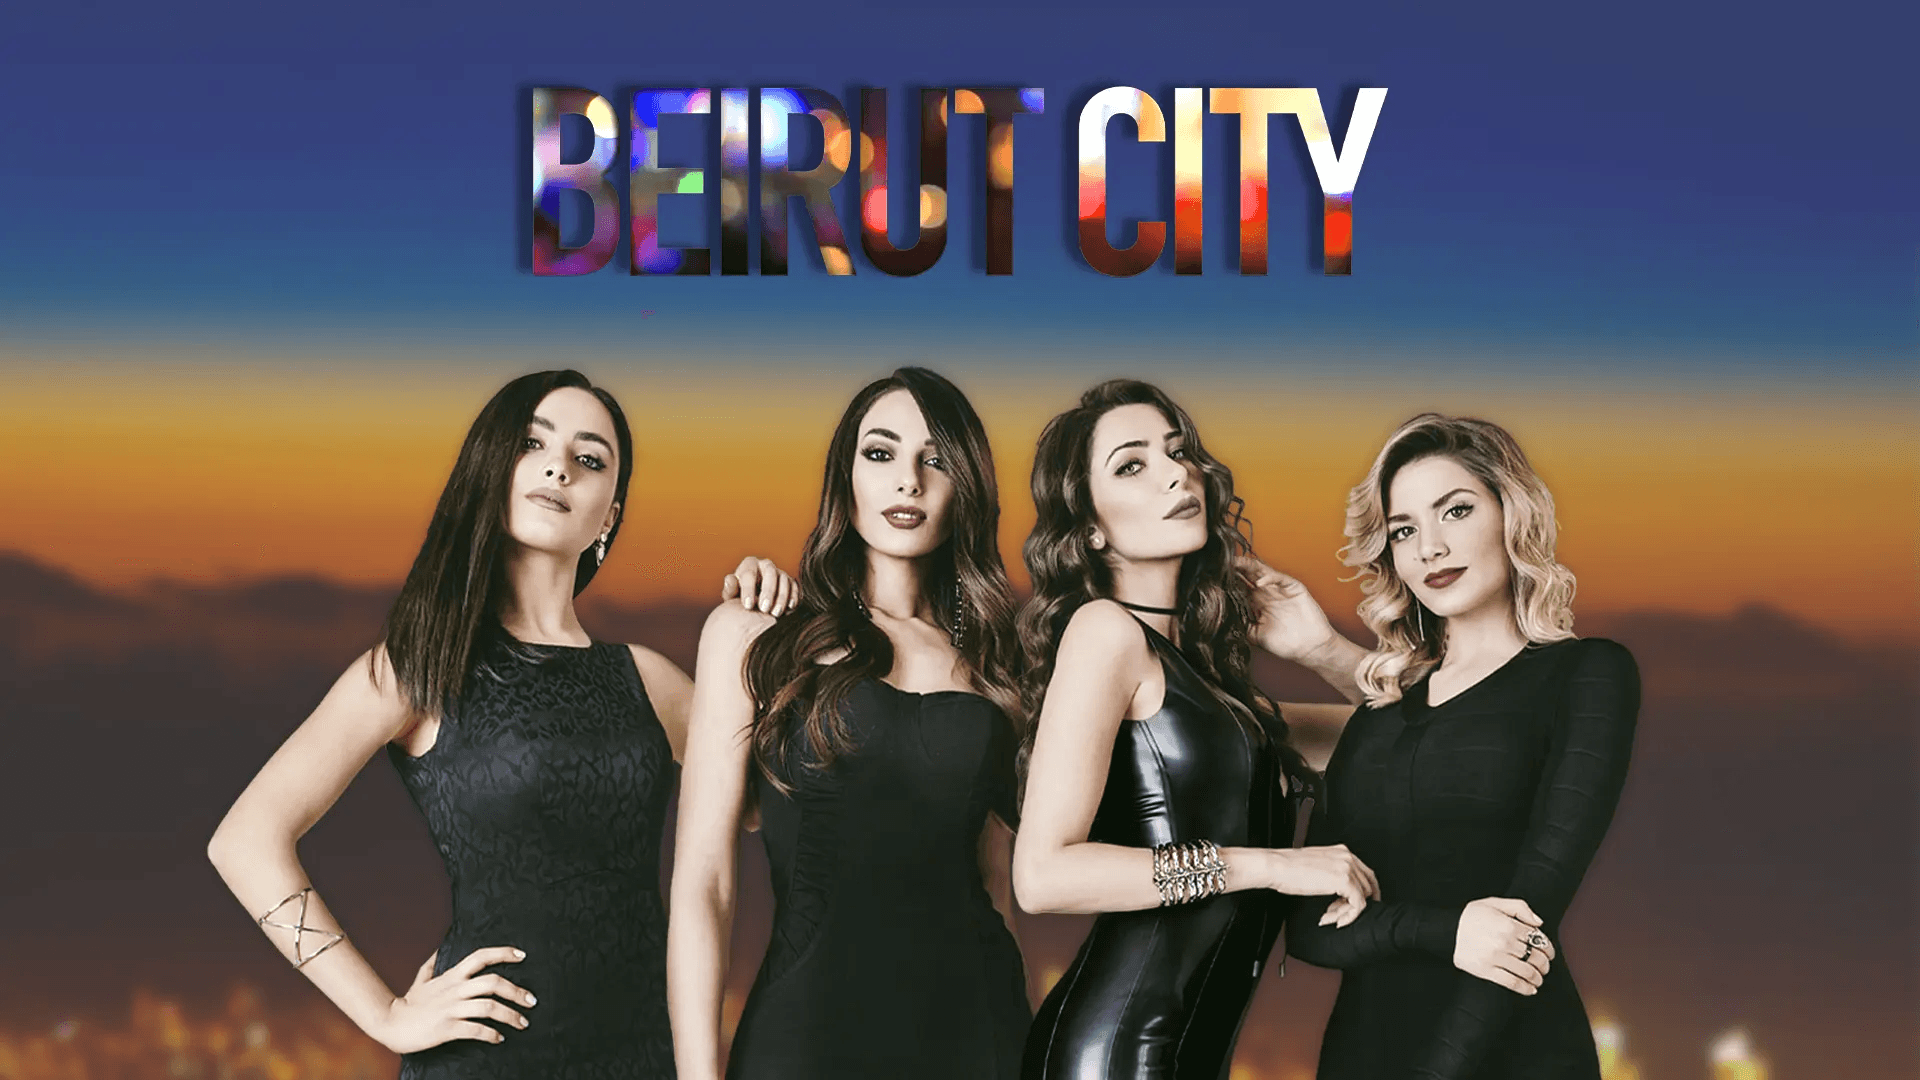 images/1_FastTV/Serials/Beirut City/bc-7_s.png